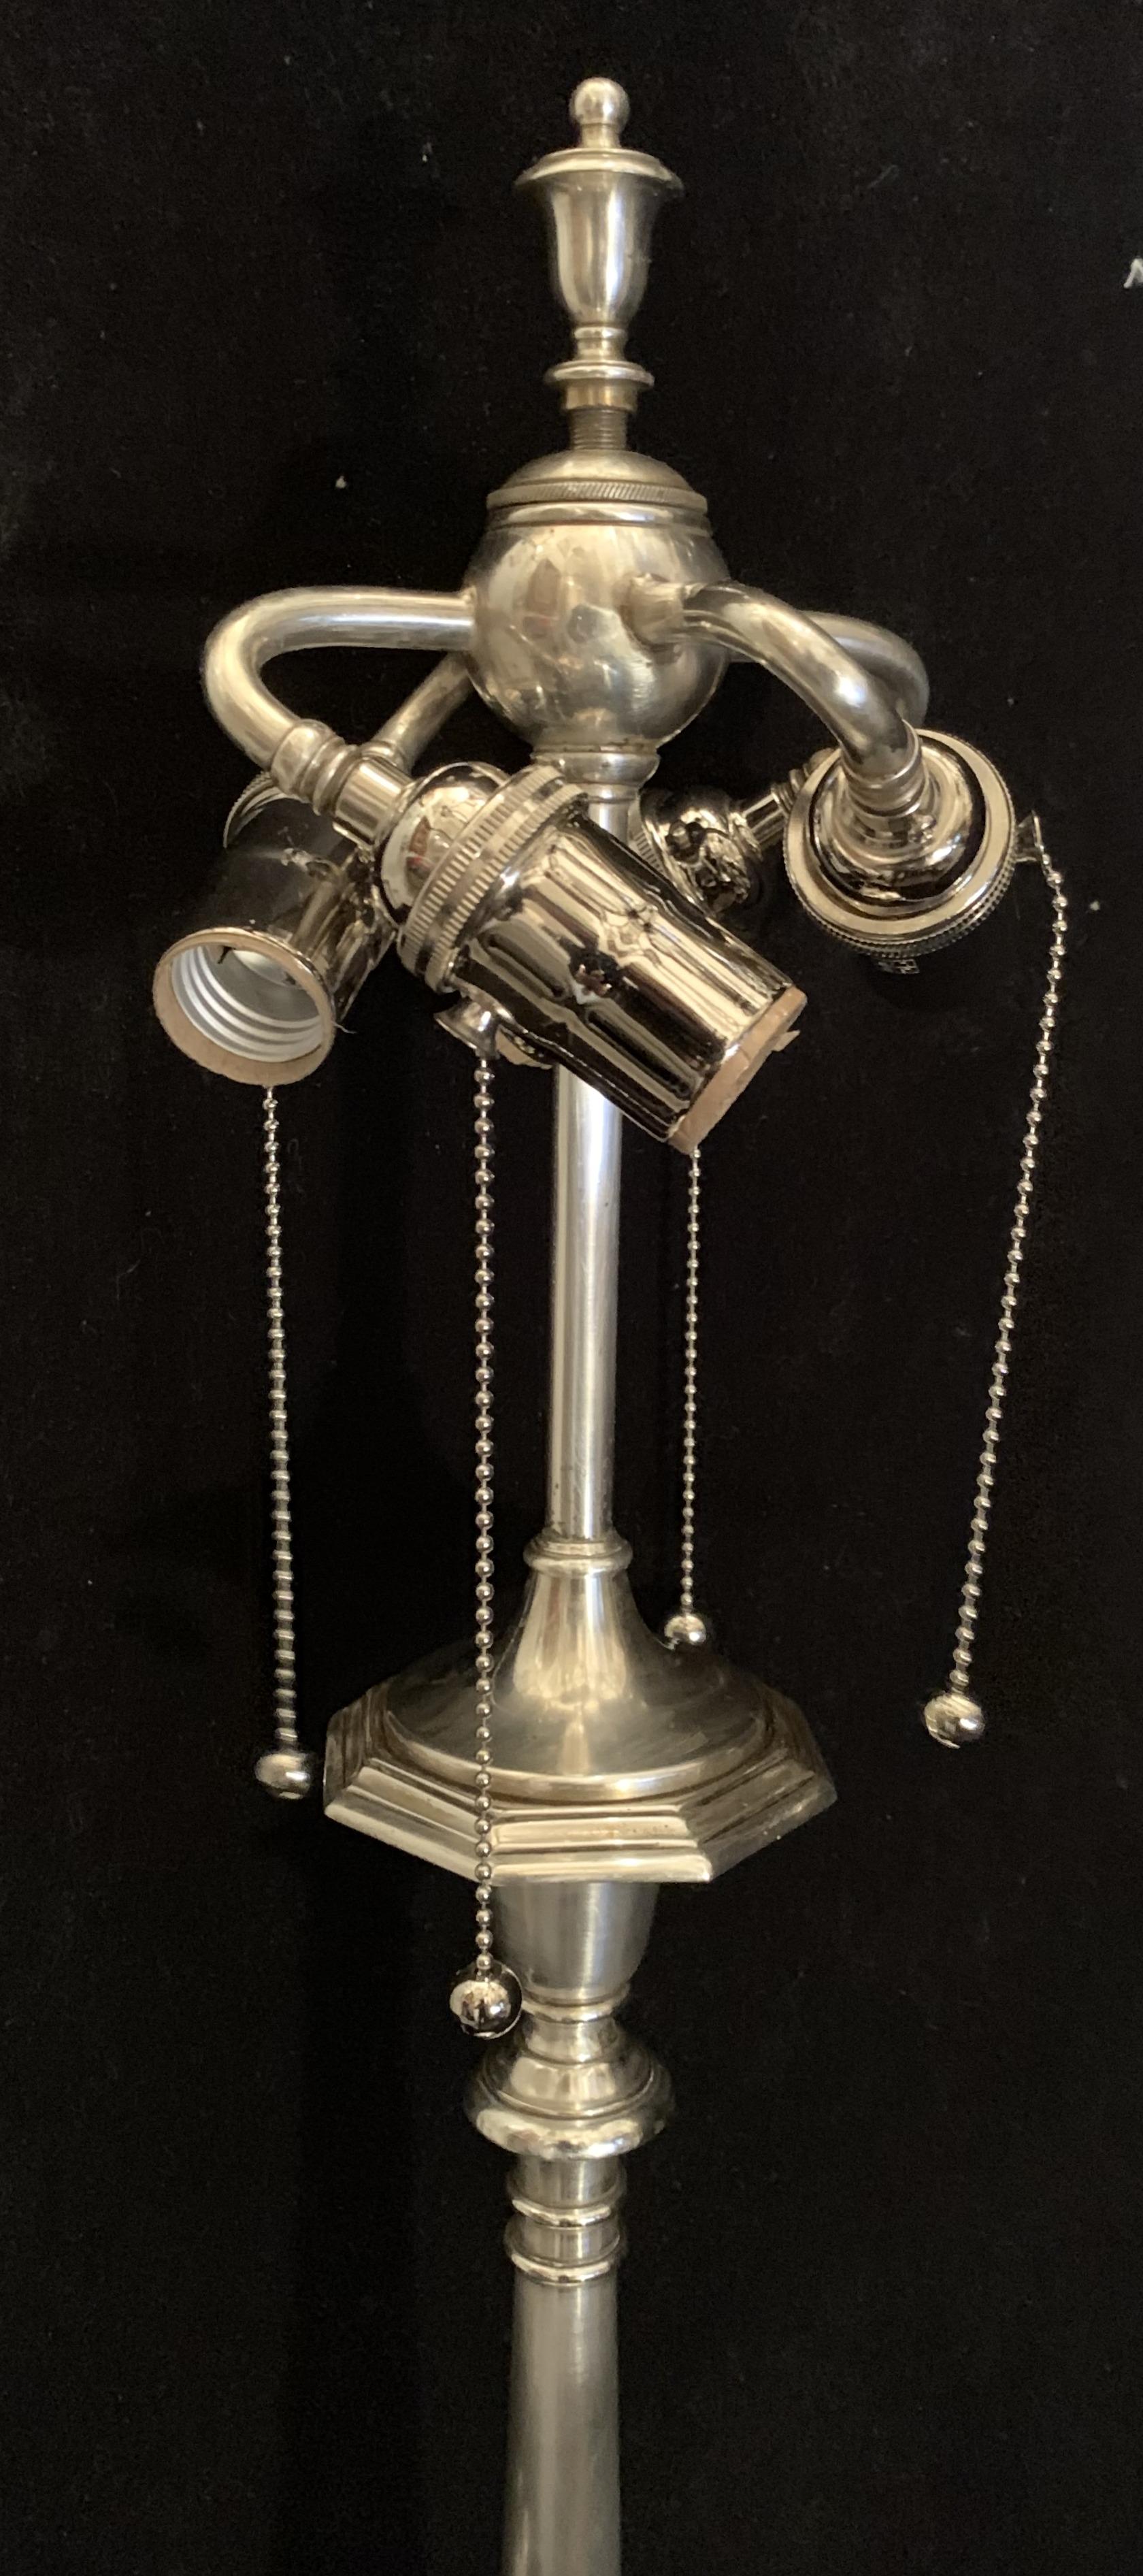 A Wonderful Stamped By The New York Maker: Sterling Bronze Co. Silver / Nickel Plated Over Bronze Table / Desk Lamp With Original Gilded Finish And 4 Edison Pull Chain Socket Cluster.
In The Manner Of E.F. Caldwell
This Lamp Has Been Completely